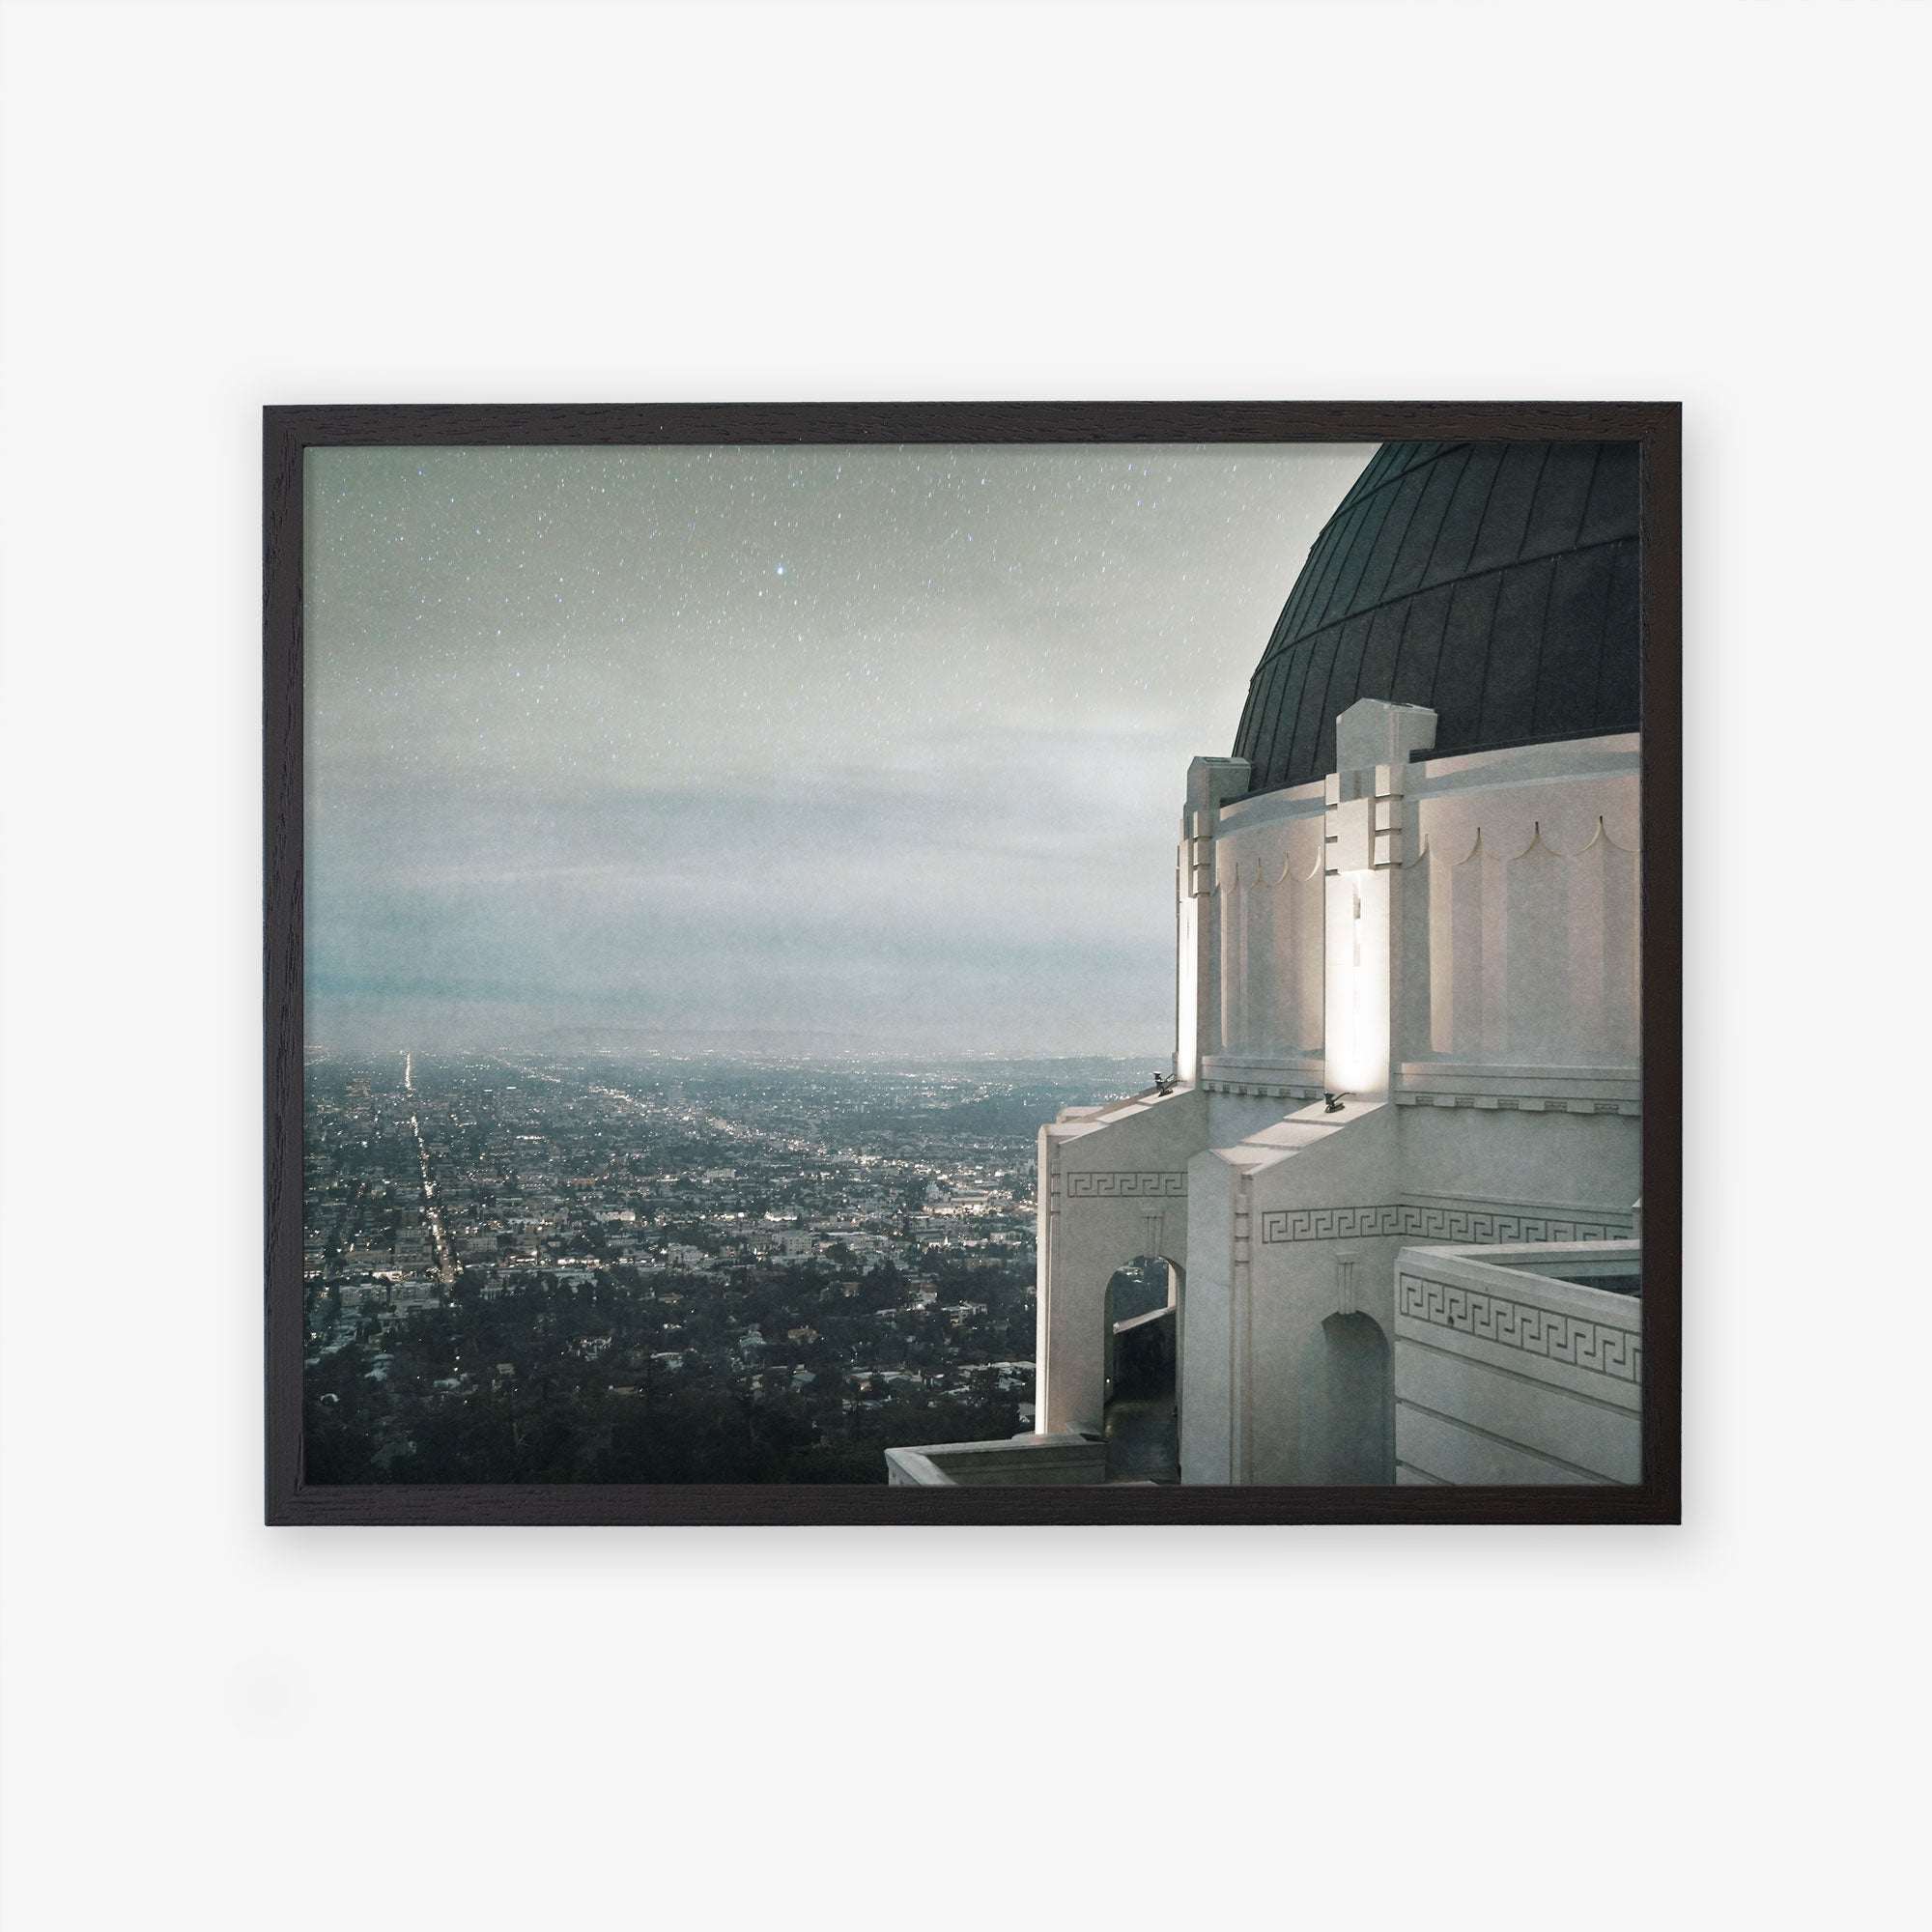 A framed archival photographic print of Offley Green&#39;s Griffith Observatory Print, &#39;The Sky At Night&#39; dome overlooking the Los Angeles cityscape at twilight, with twinkling stars visible in the sky and city lights spread out below.